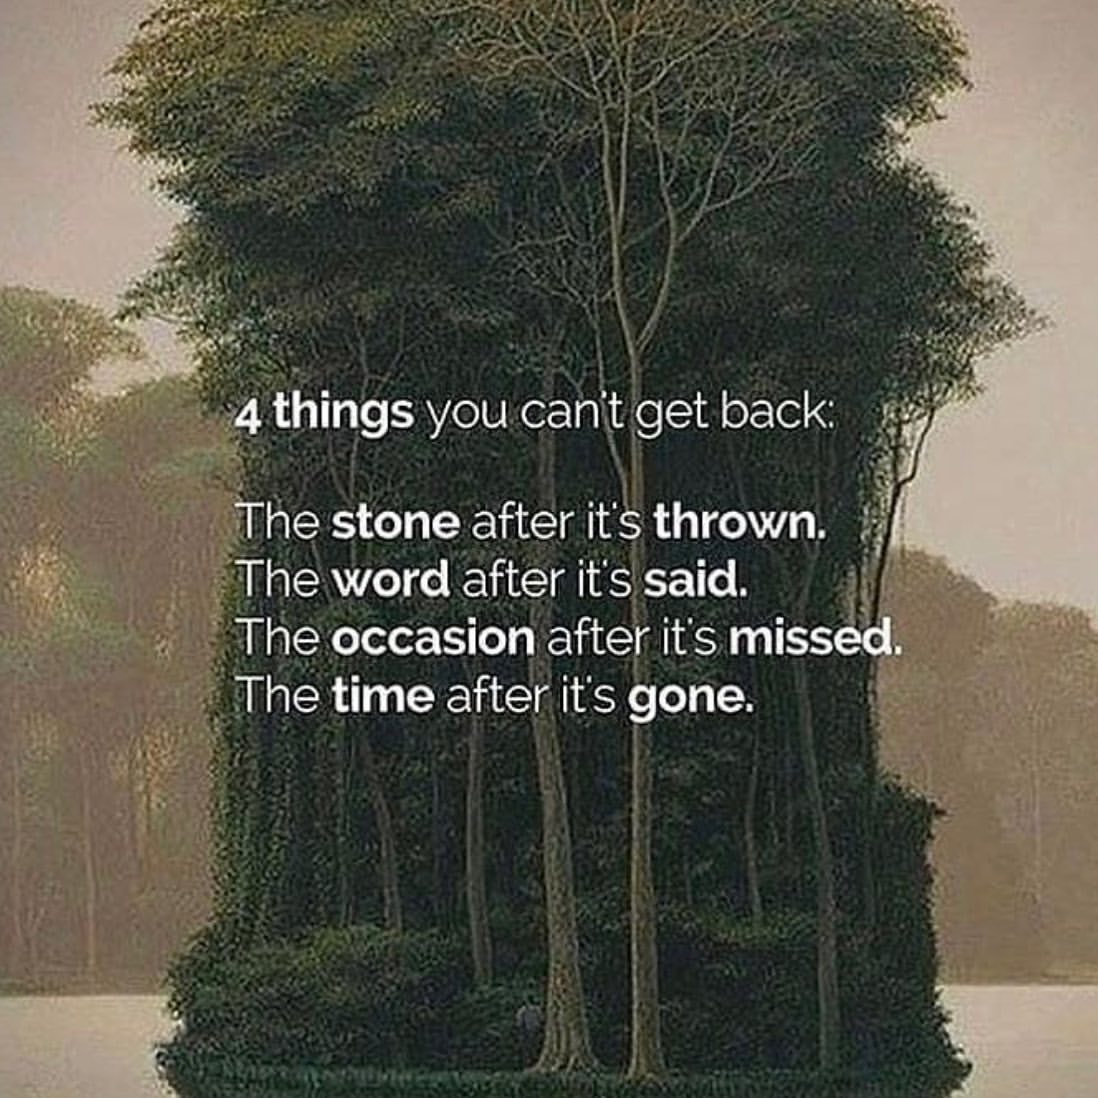 4 things you cant get back: The stone after it's thrown. The word after it's said. The occasion after it's missed. The time after it's gone.